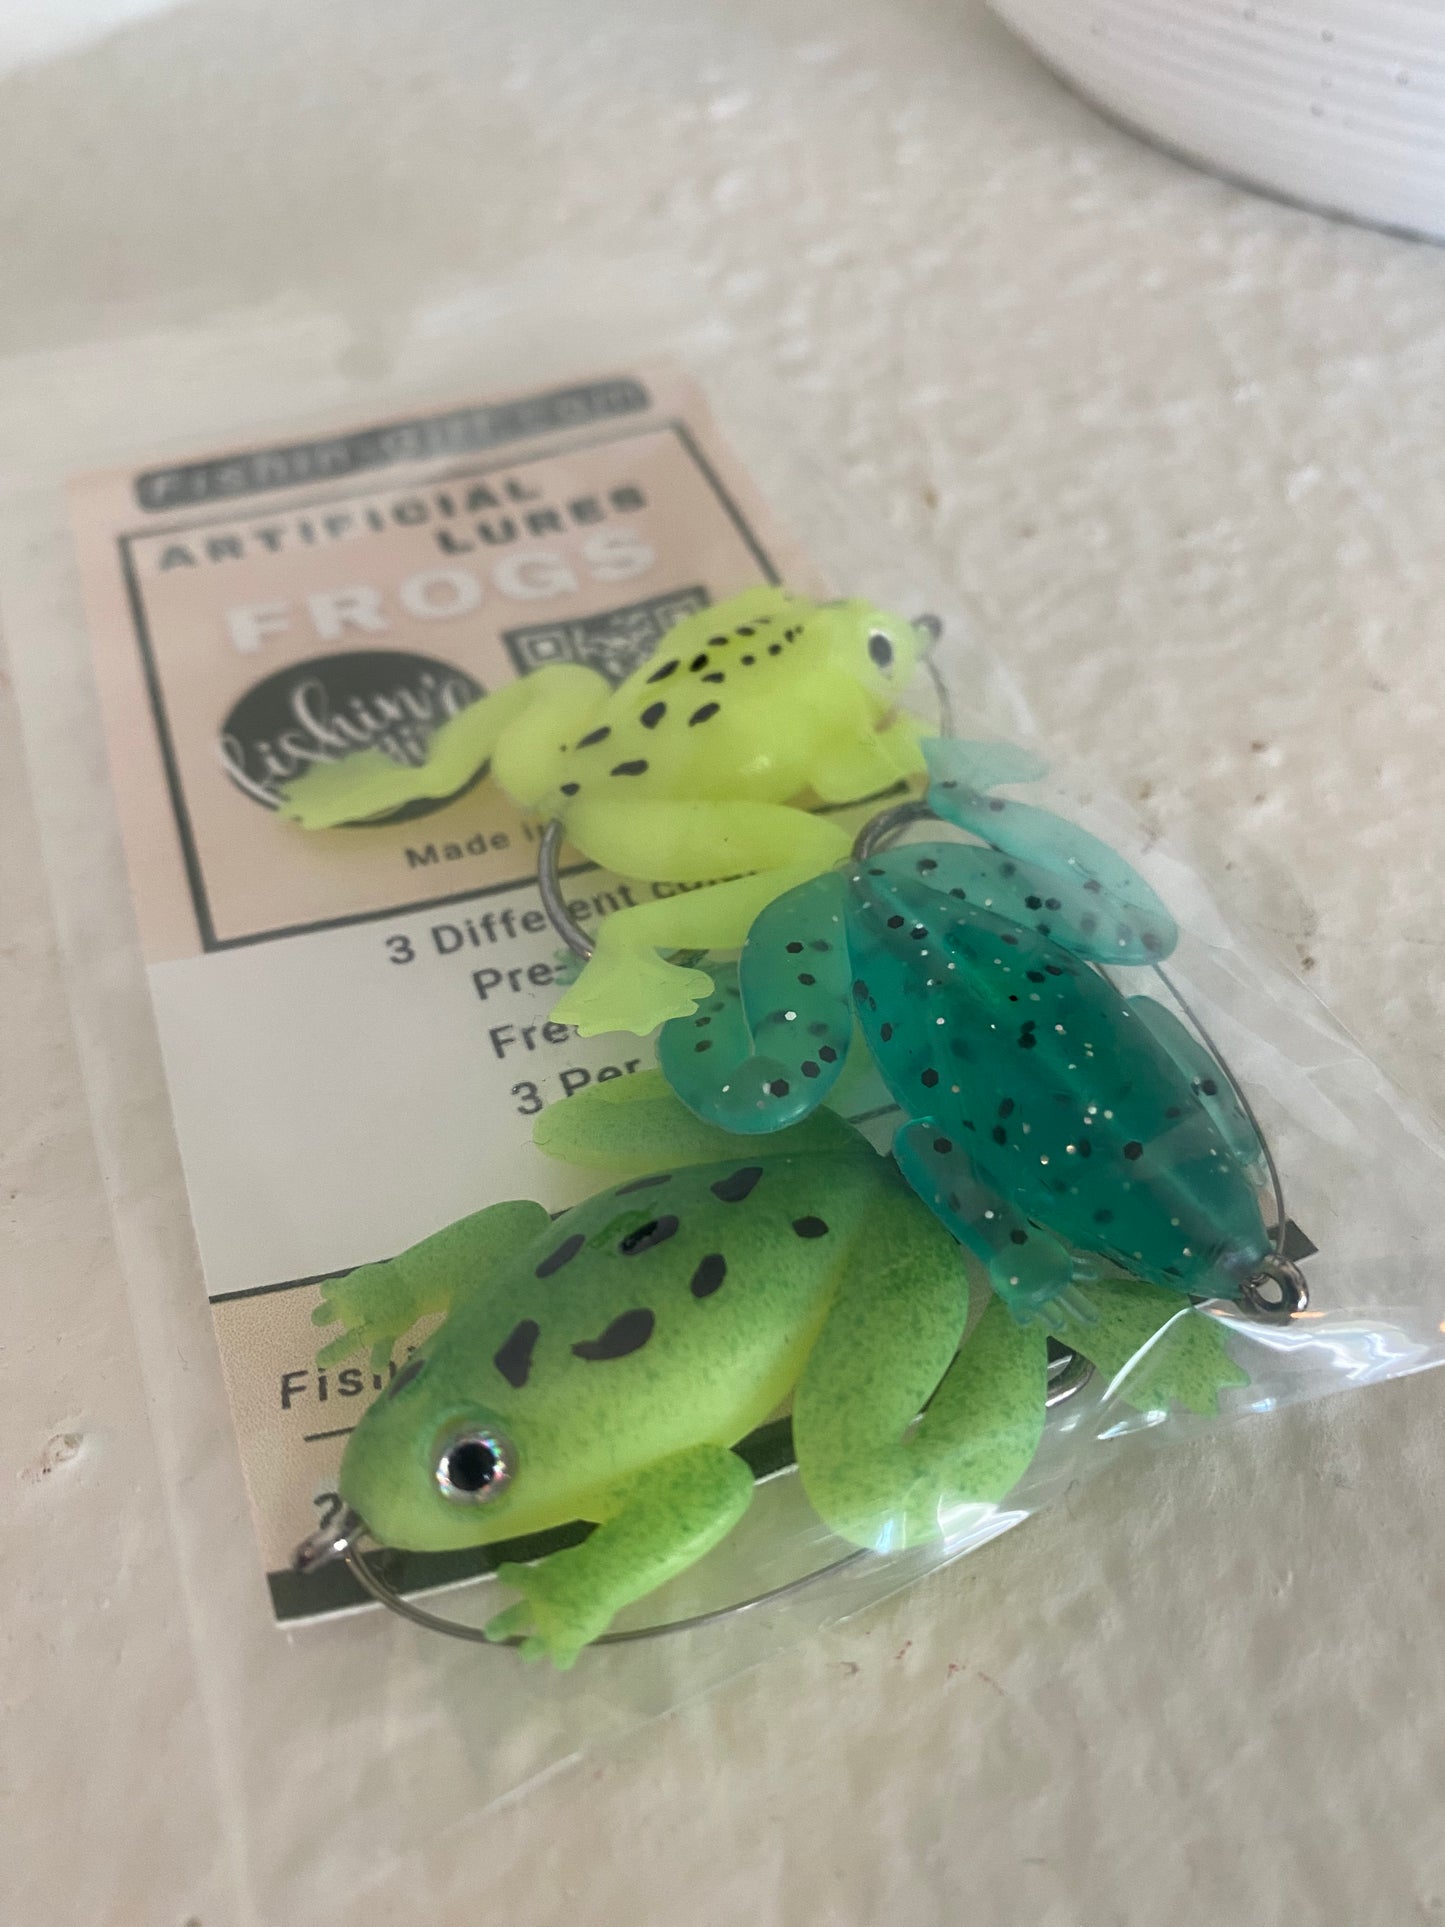 Artificial Lures - Frogs, Minnows or Shrimp